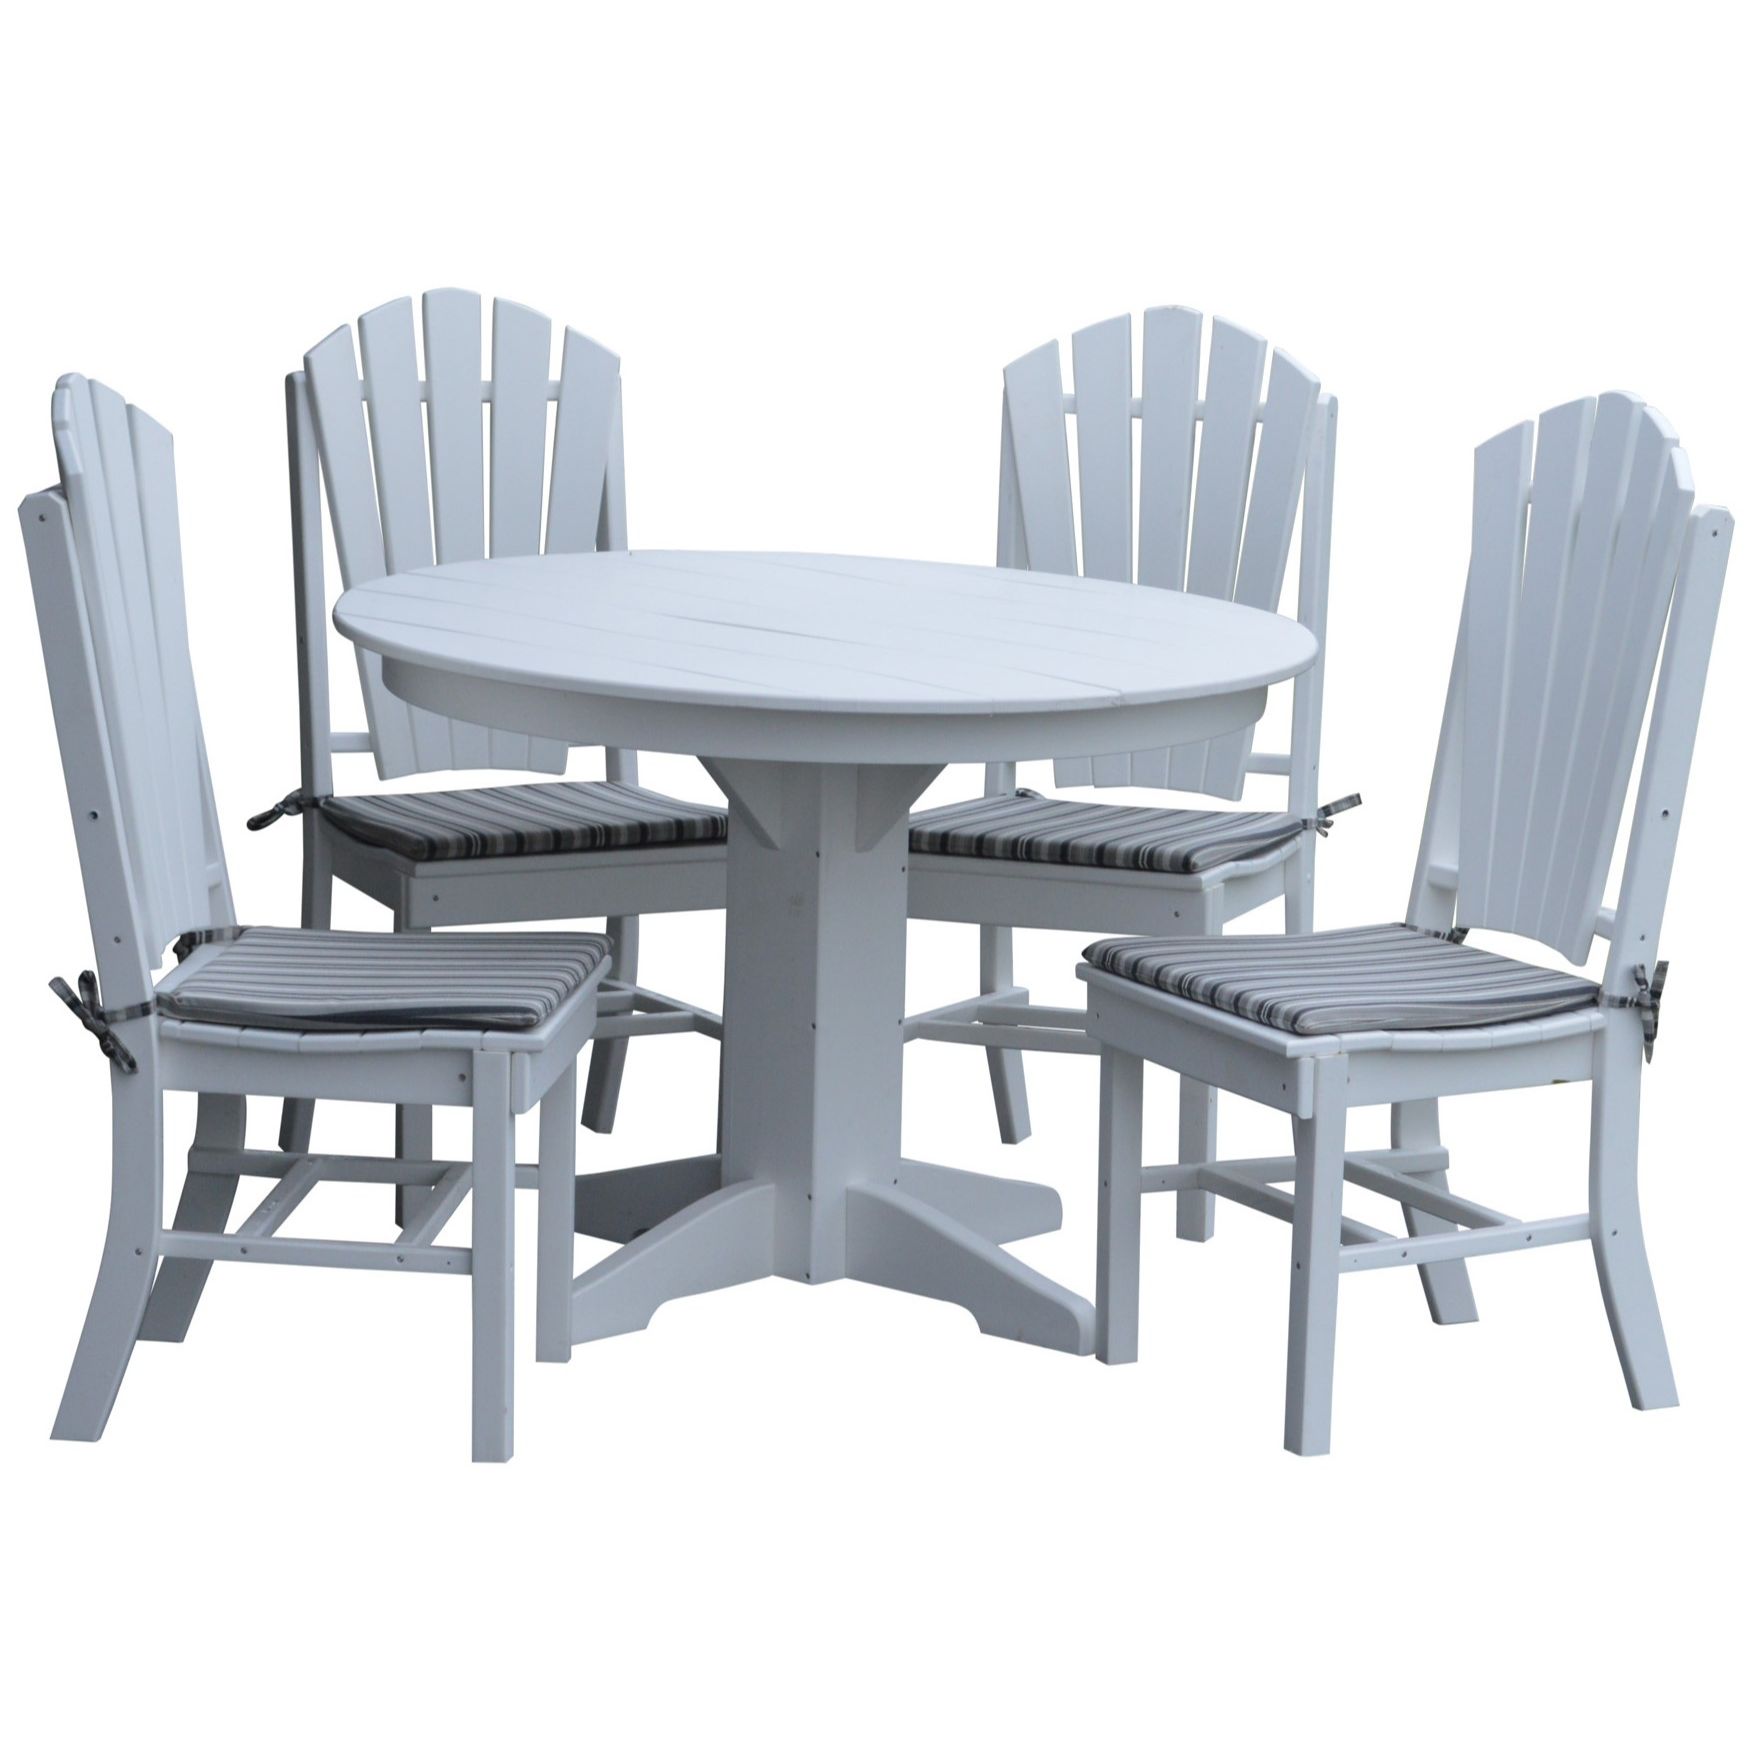 Adirondack Dining Chair in Poly Lumber